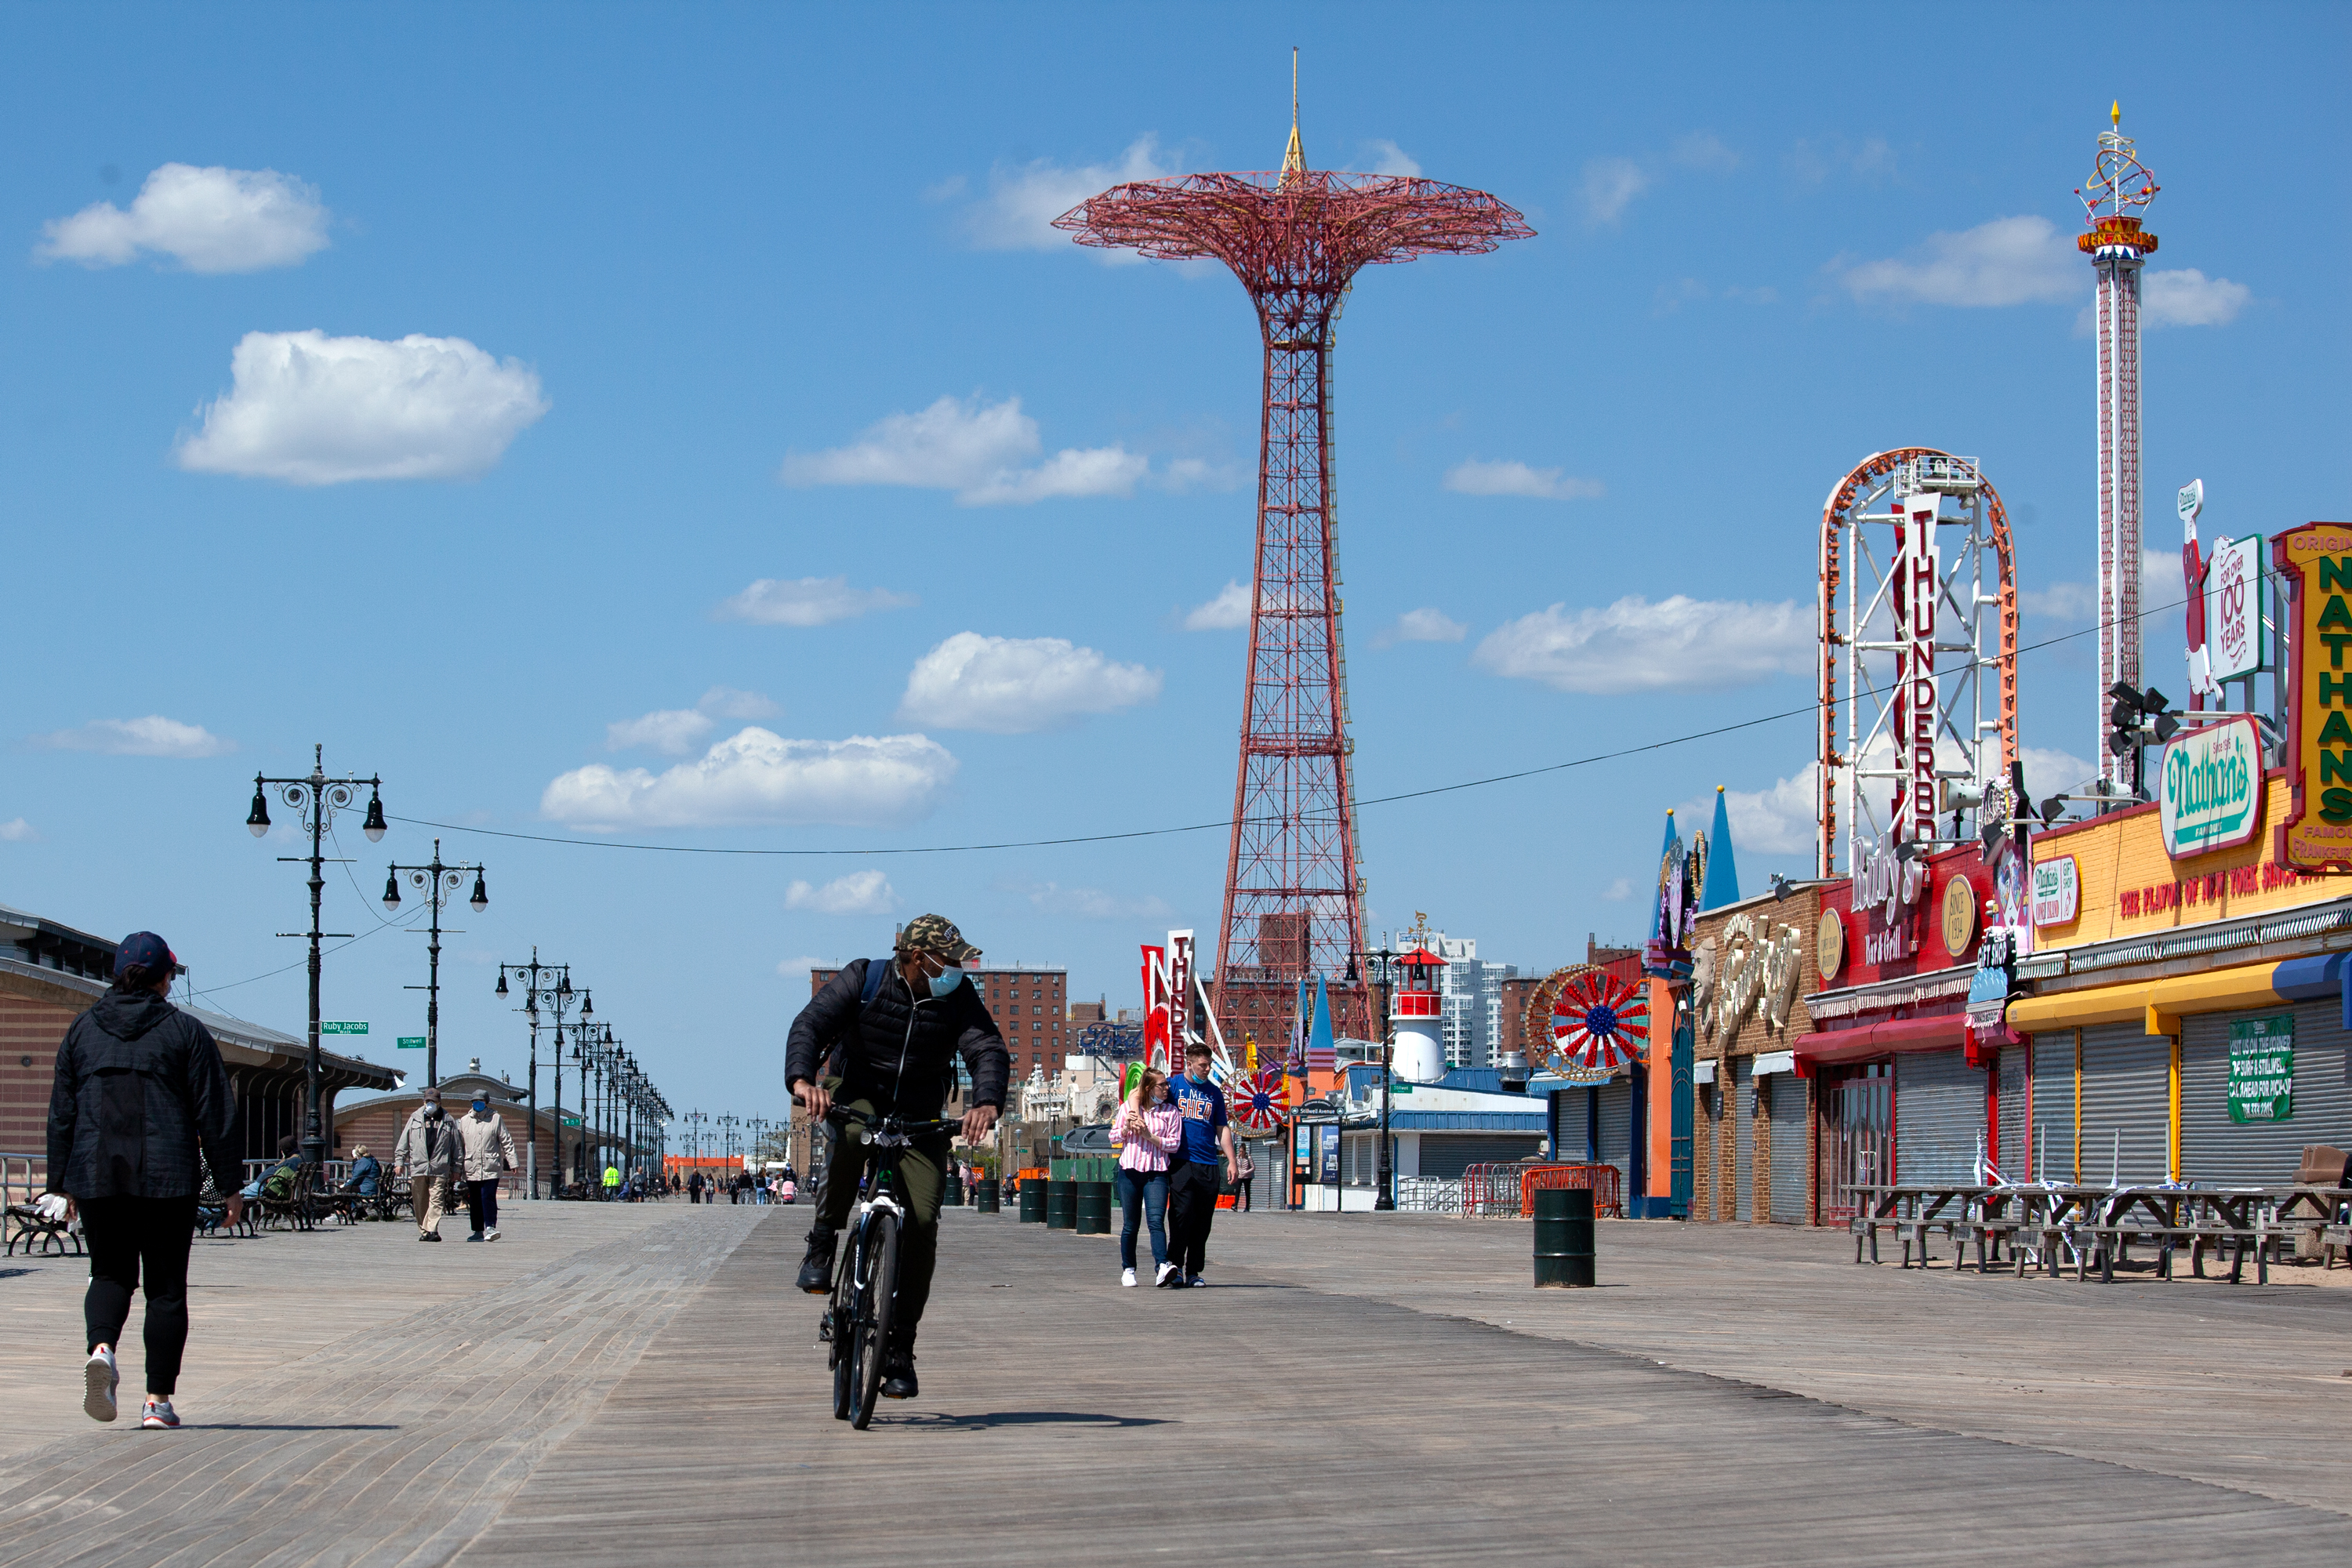 People enjoy the Coney Island boardwalk during the COVID pandemic, May 7, 2020.